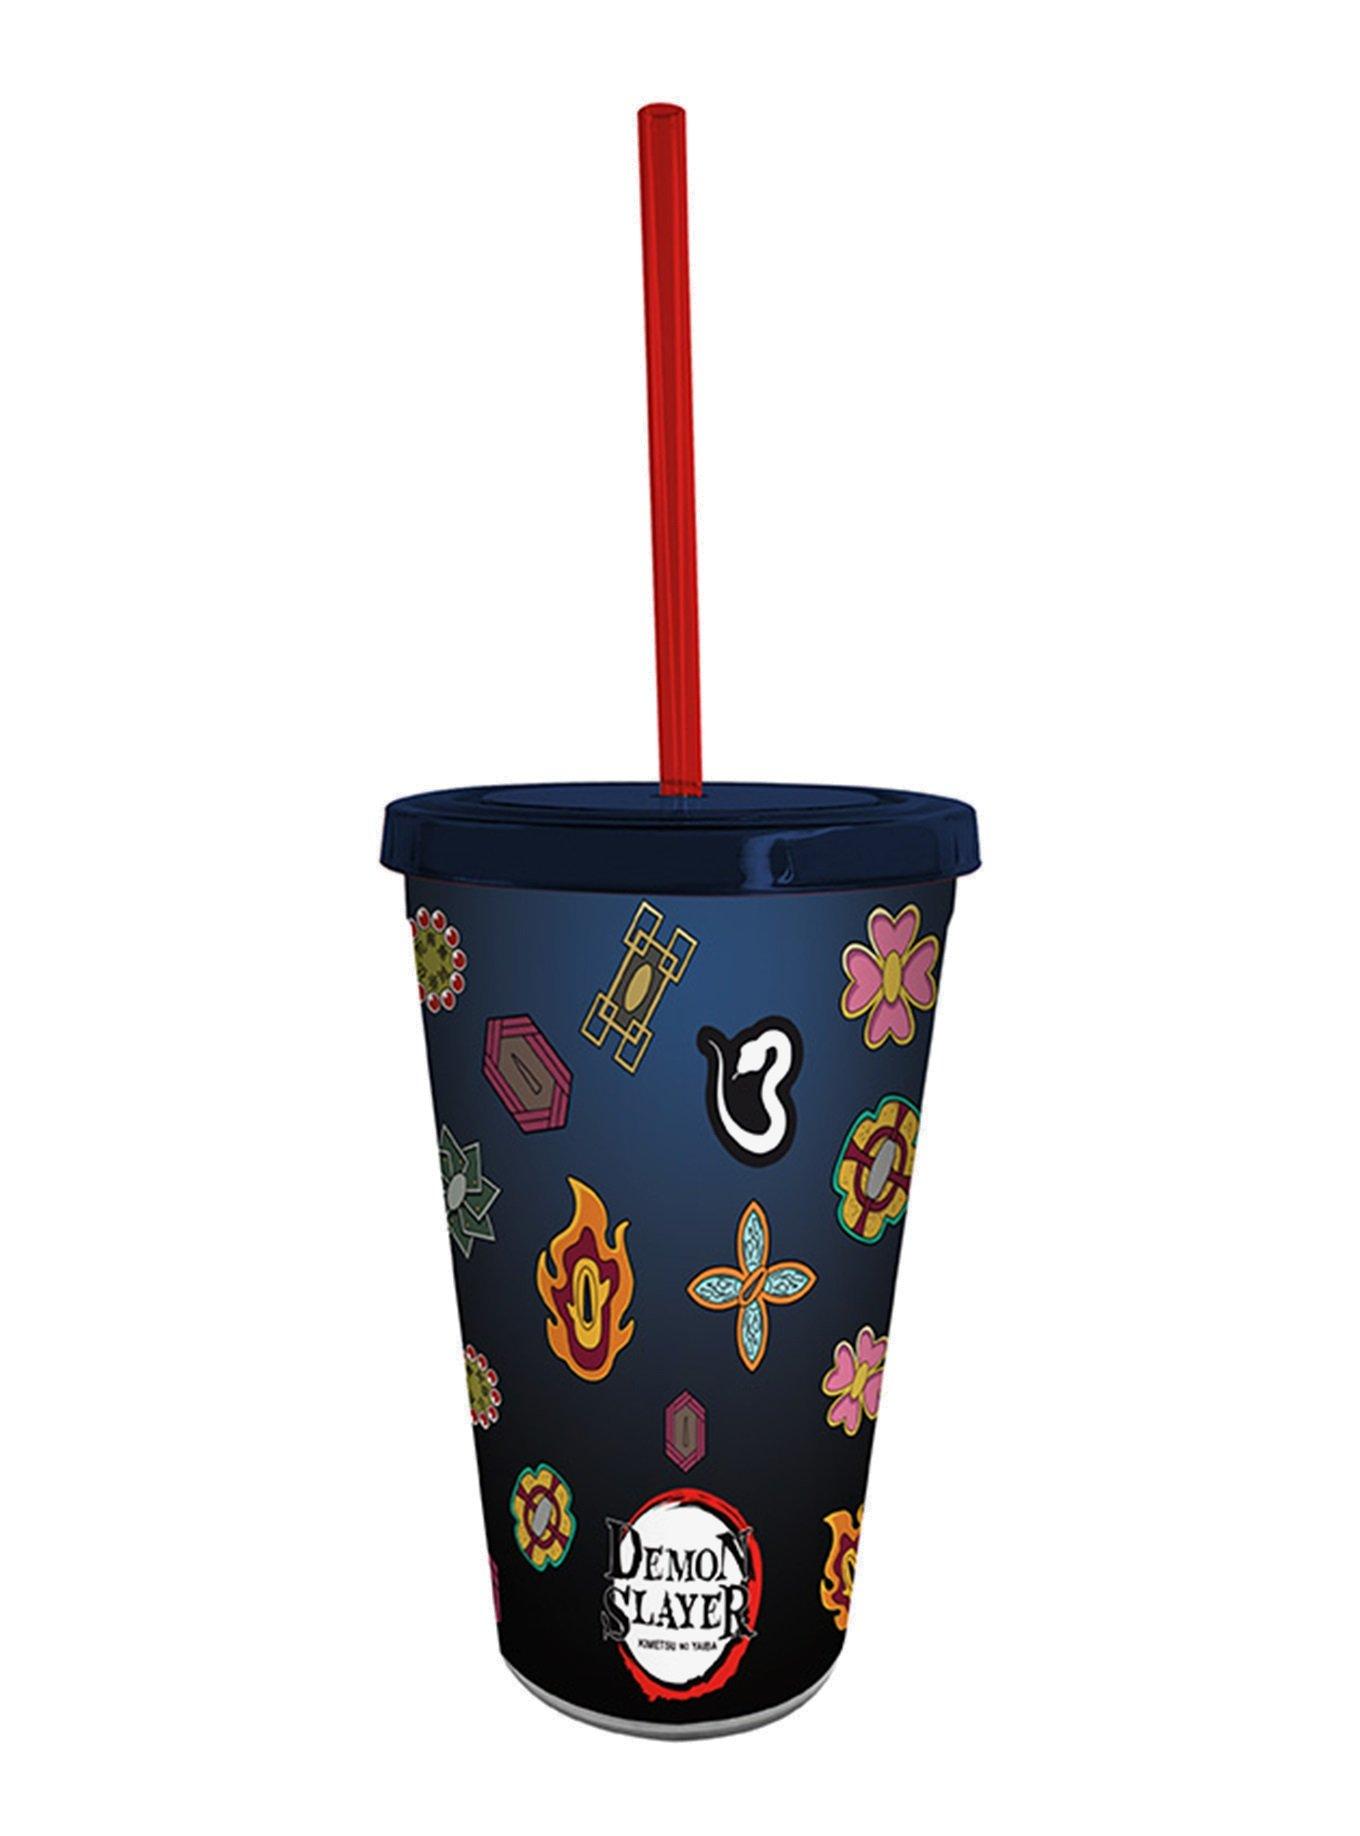  Anime Straw Covers Cap for Cup Straw Accessories